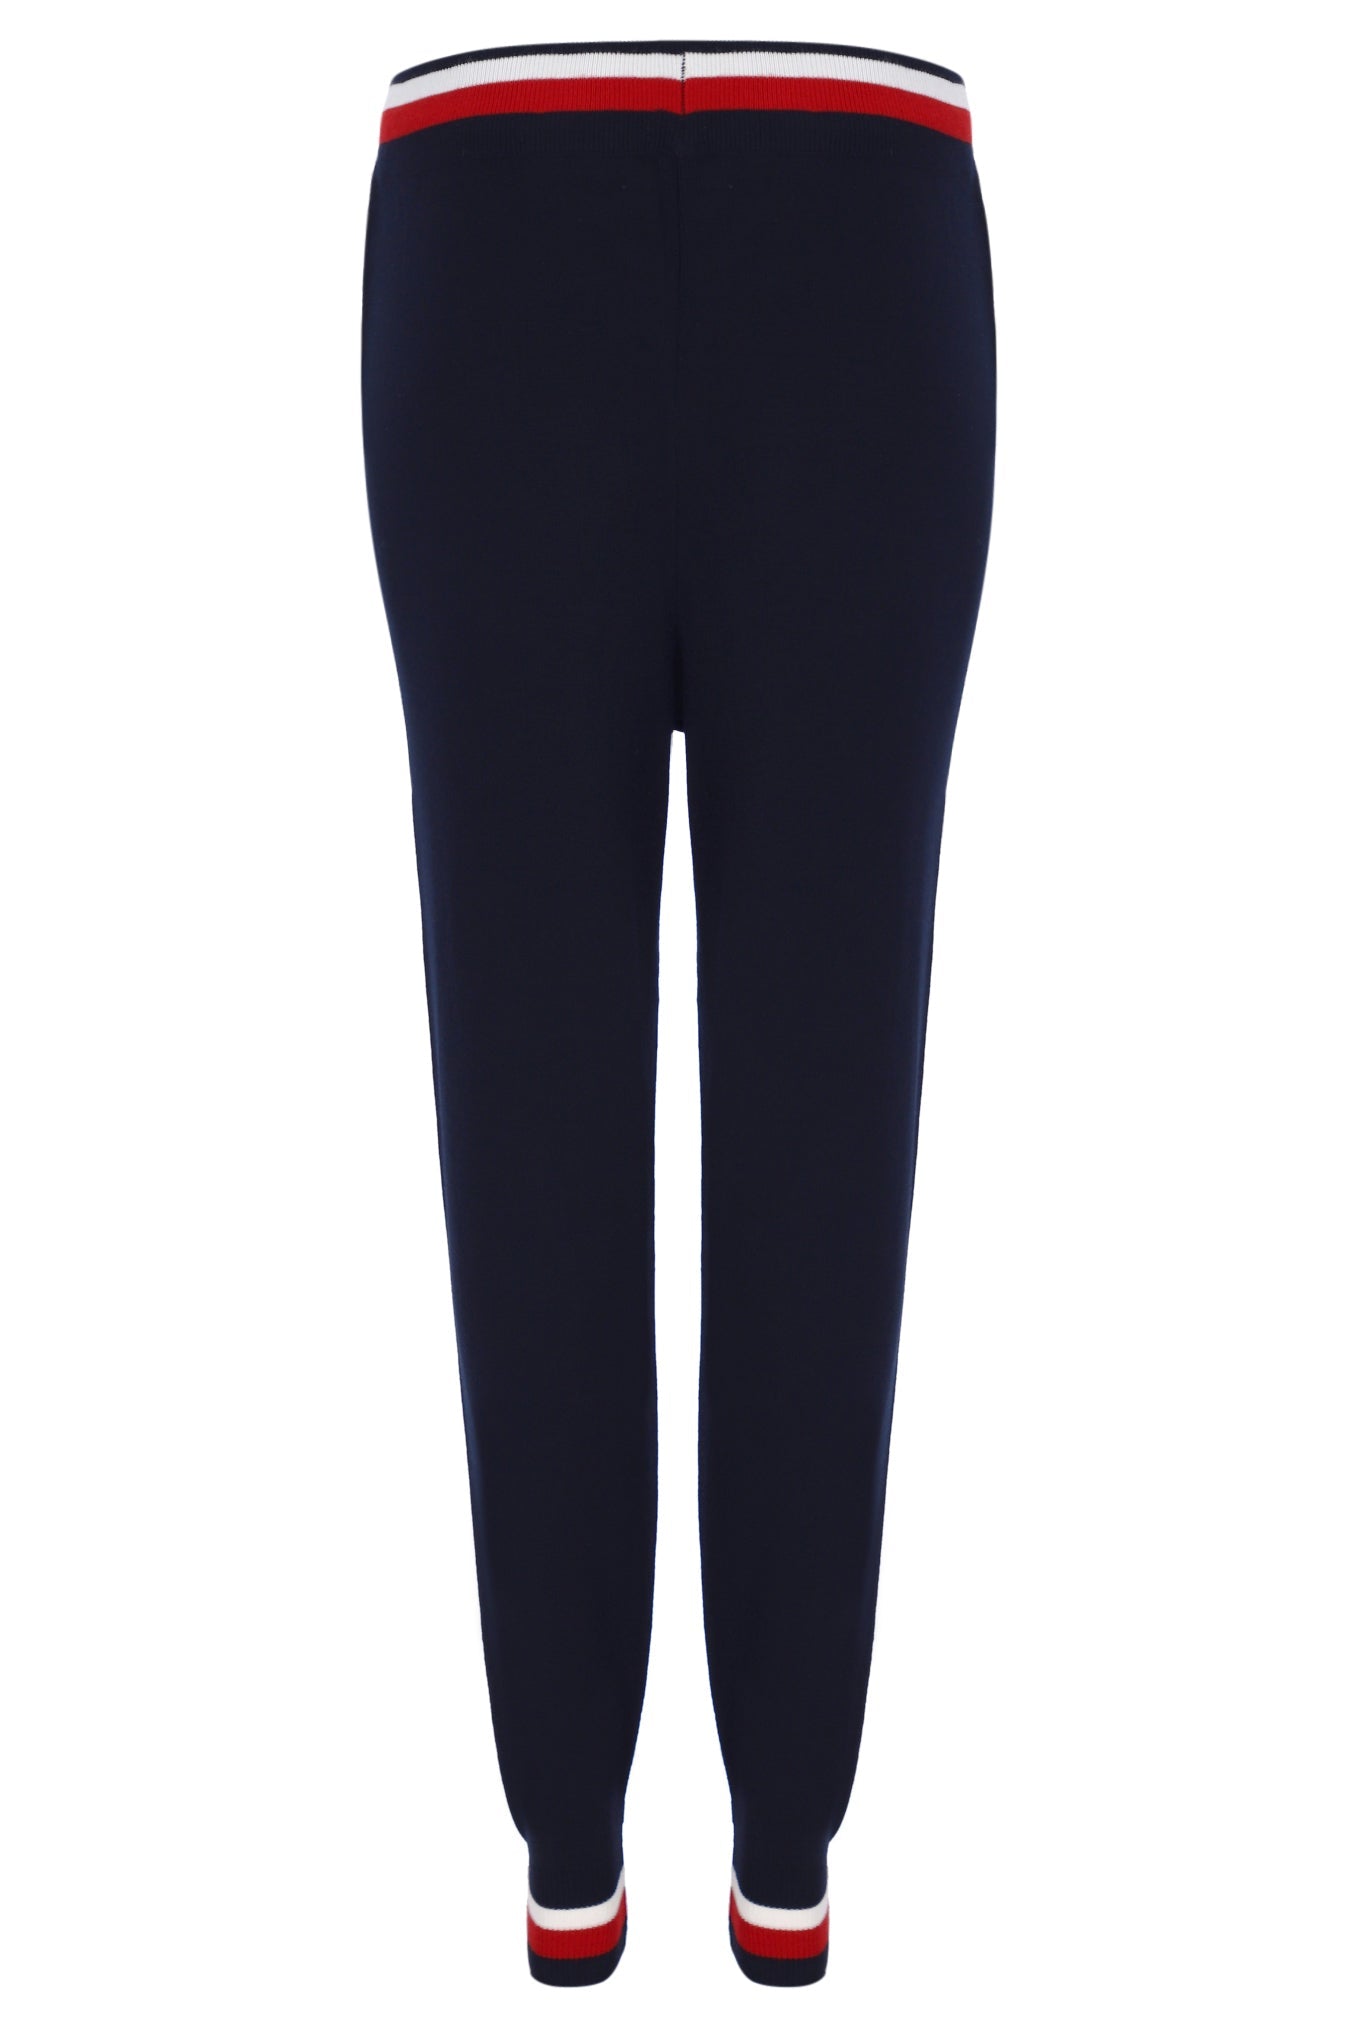 Ladies Frankie Navy/Red/White Knit Pant-Back View